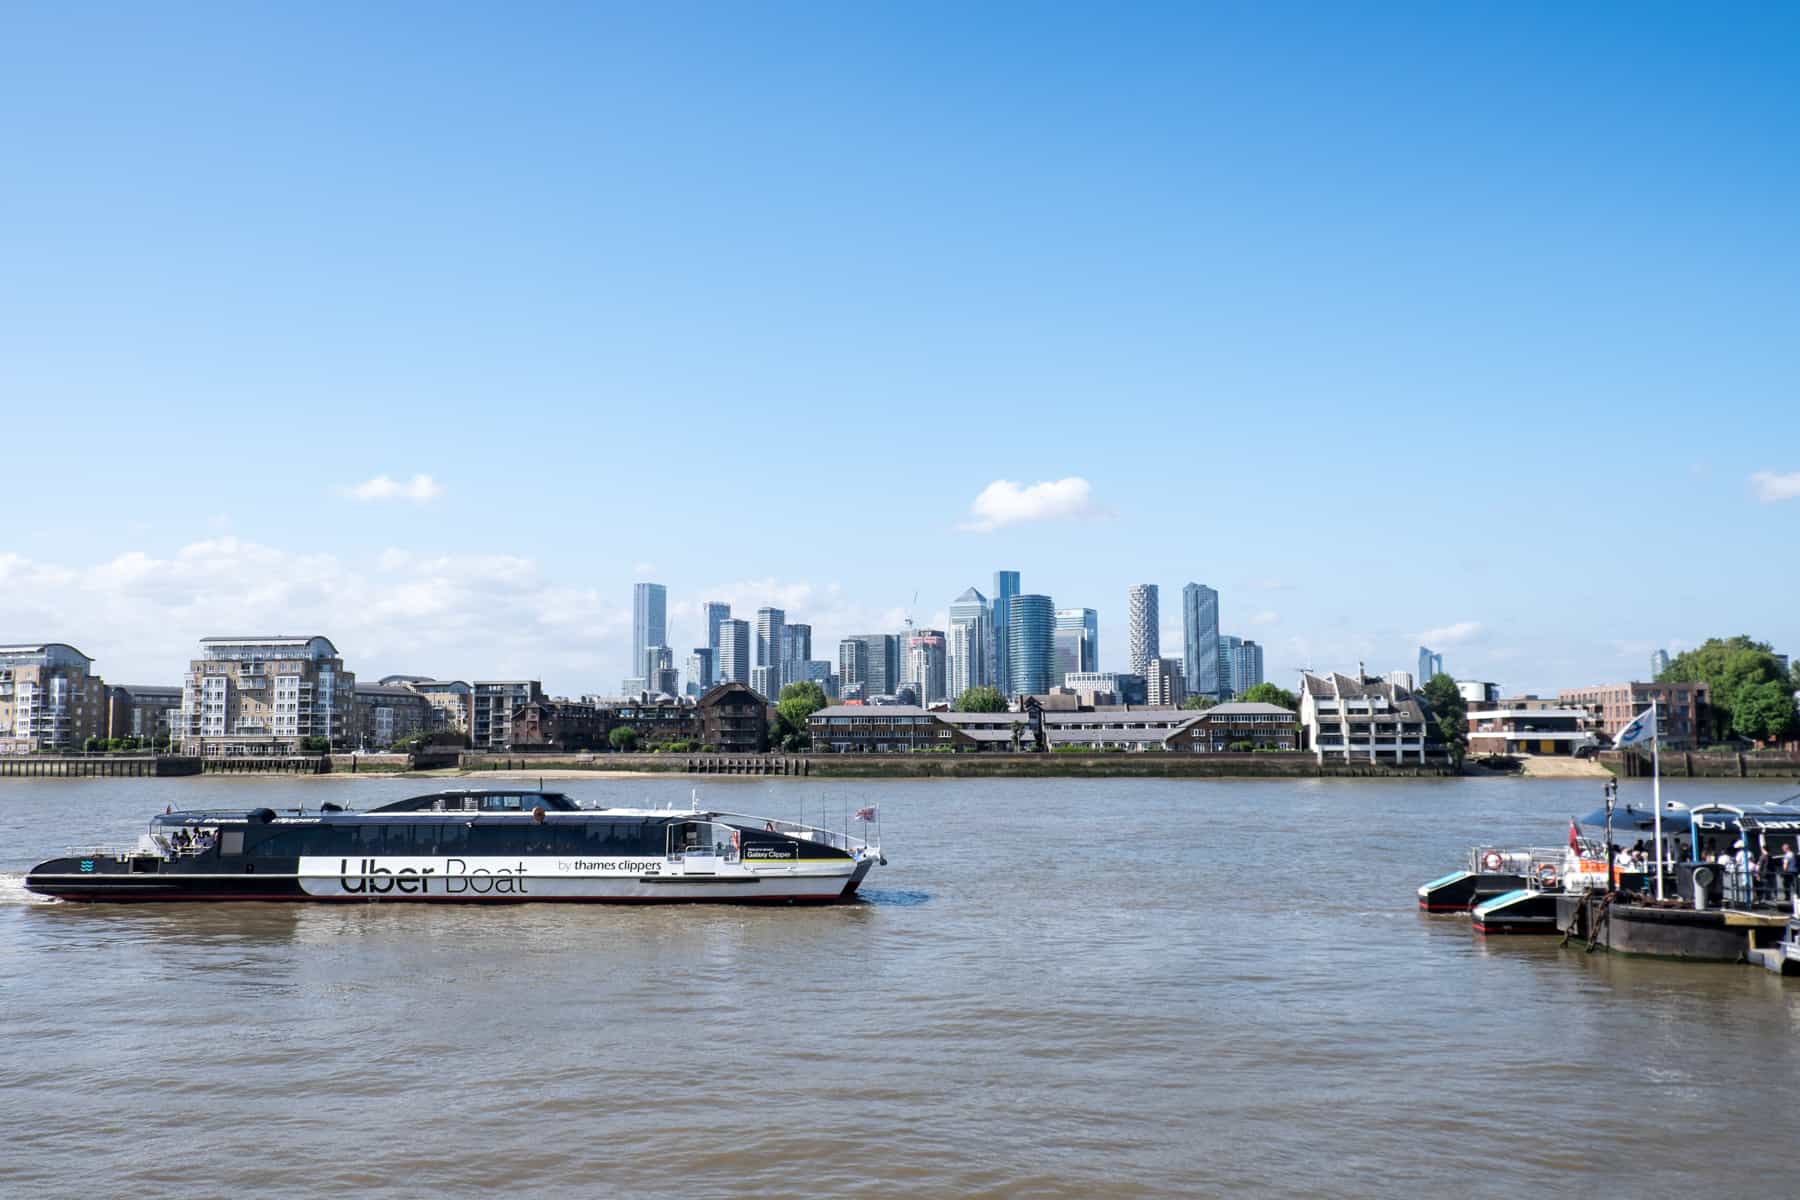 An Uber Boat by Thames Clippers driving towards a Pier on the River Thames with the Canary Wharf skyline in the background.